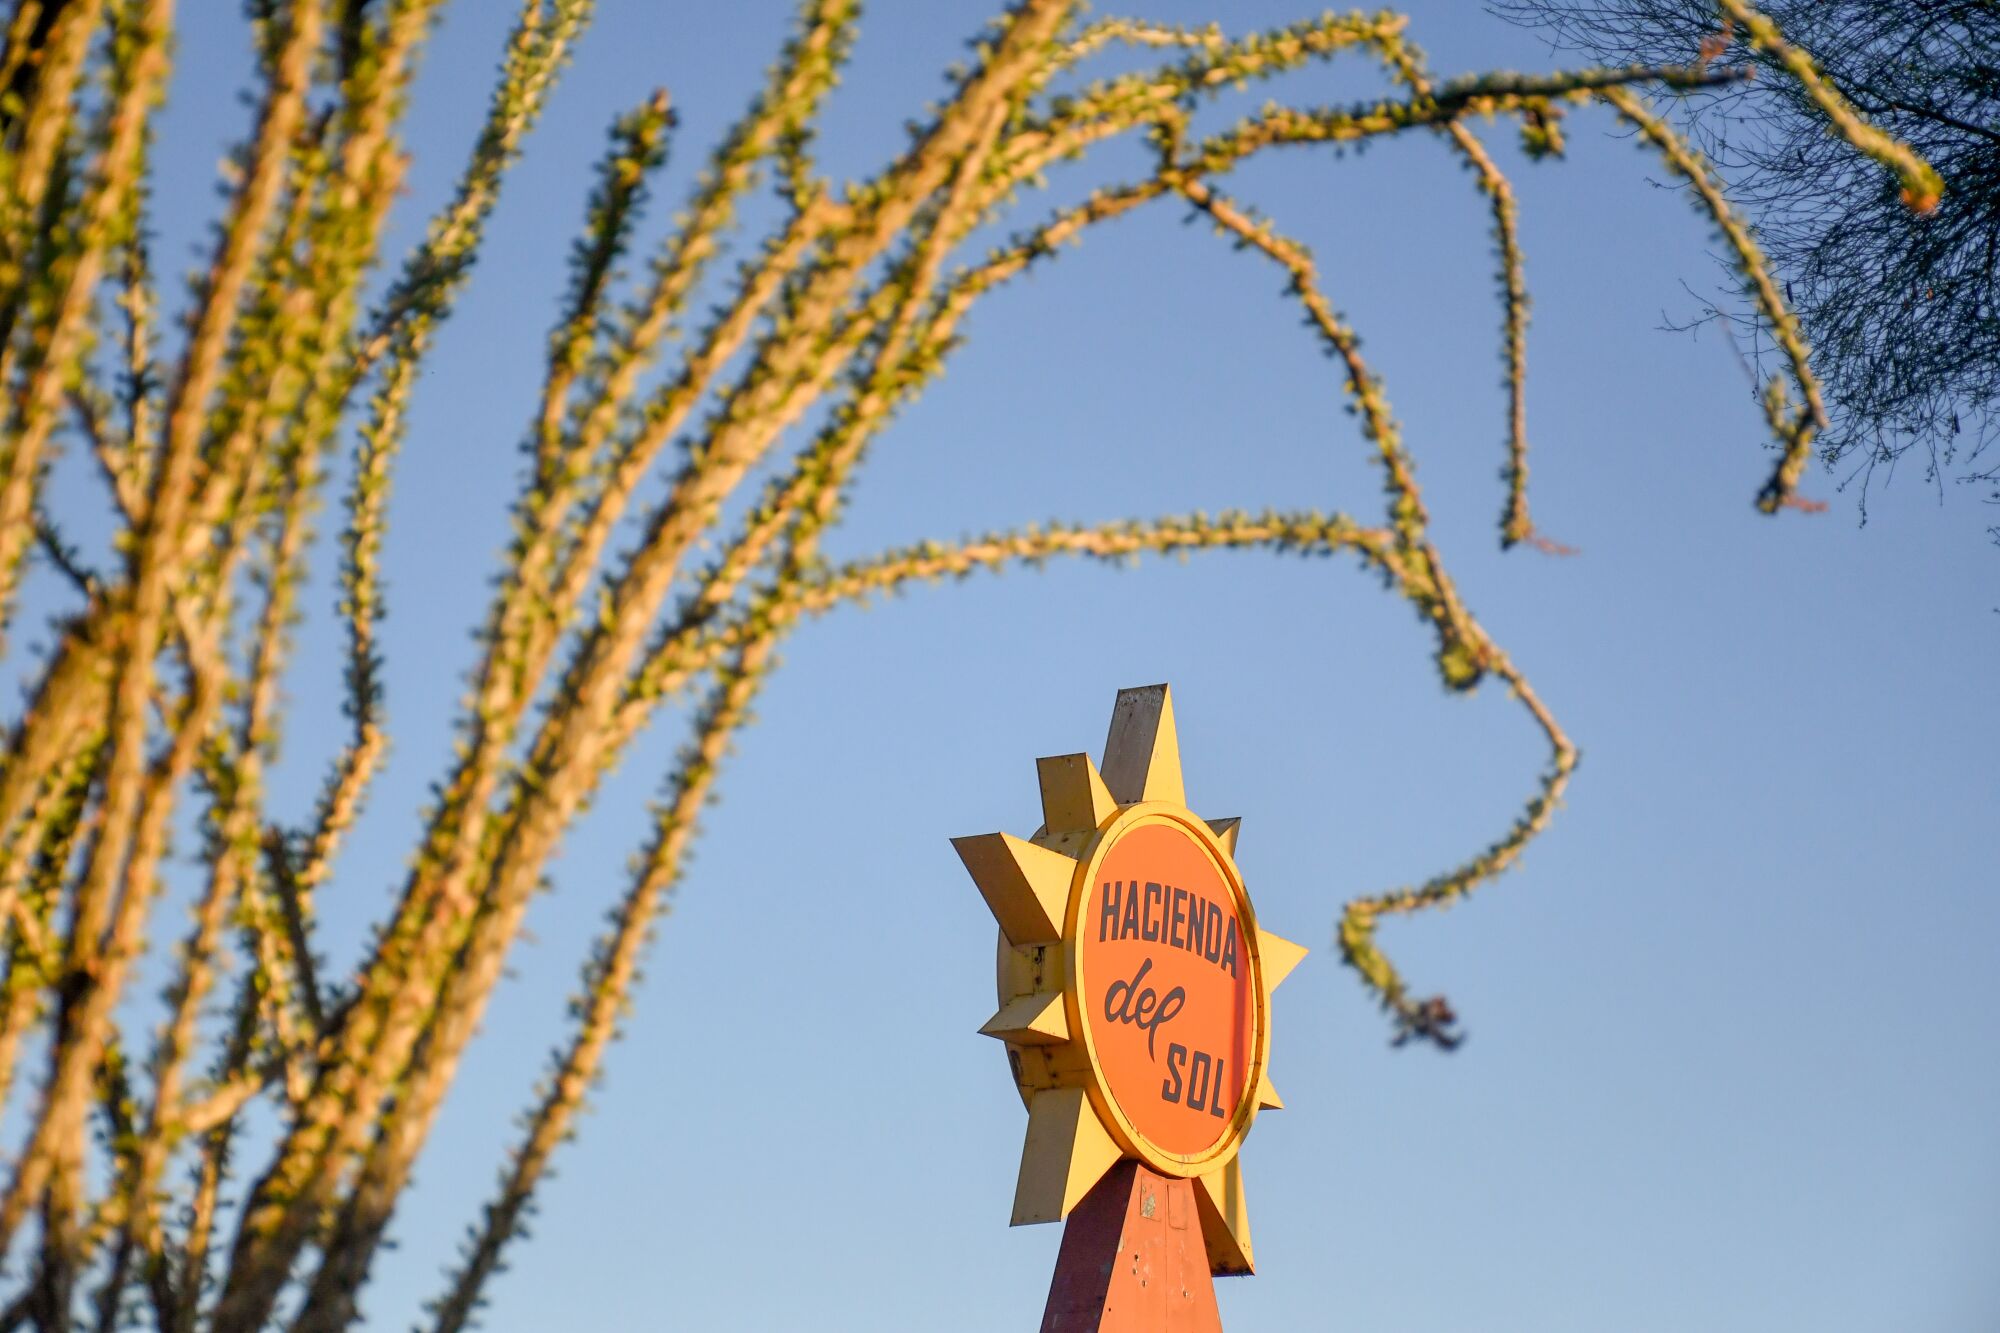 A sun-shaped motel sign for the Hacienda del Sol, framed by ocotillo branches.